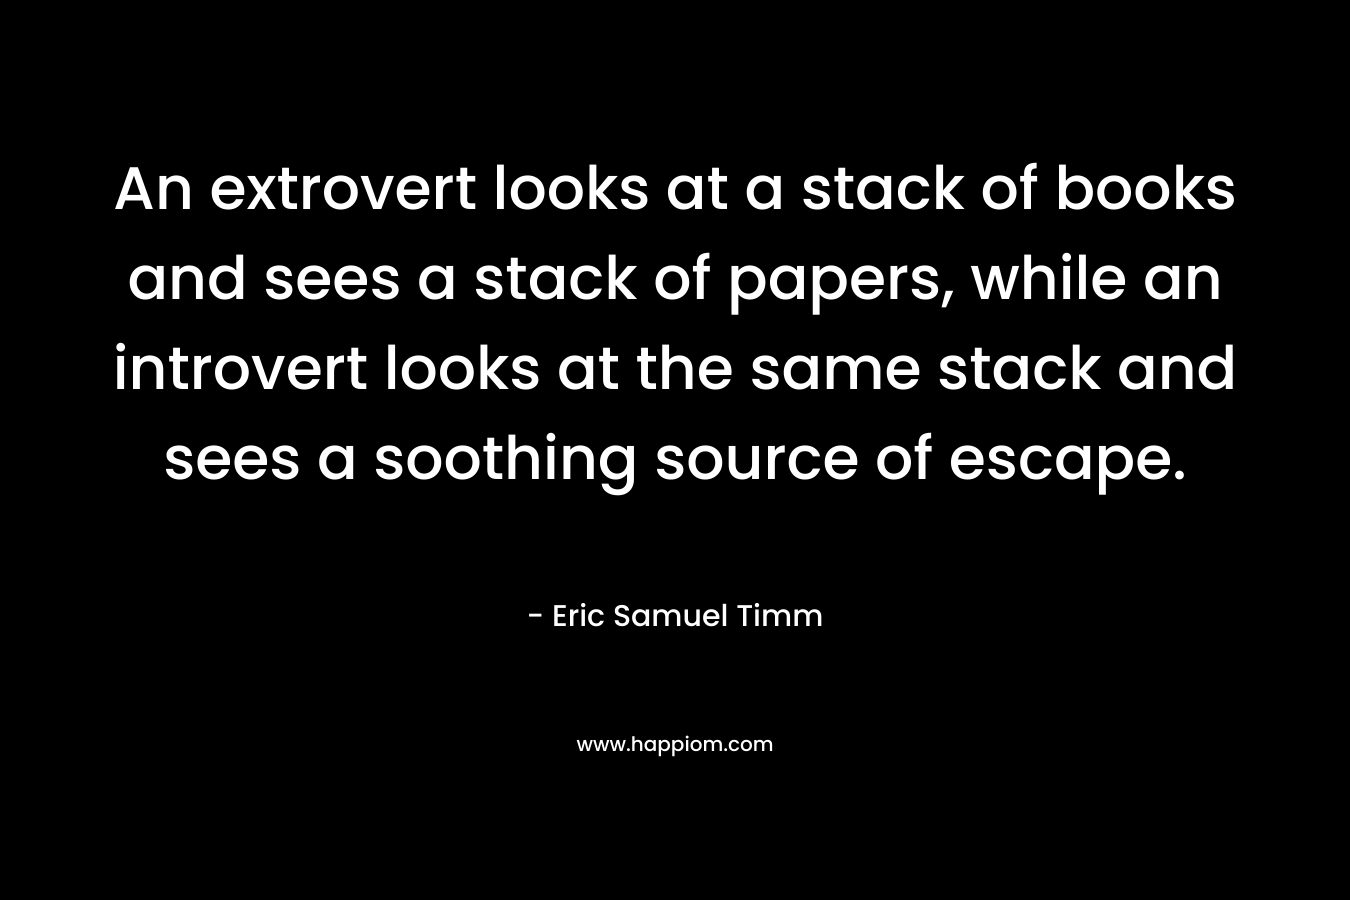 An extrovert looks at a stack of books and sees a stack of papers, while an introvert looks at the same stack and sees a soothing source of escape. – Eric Samuel Timm